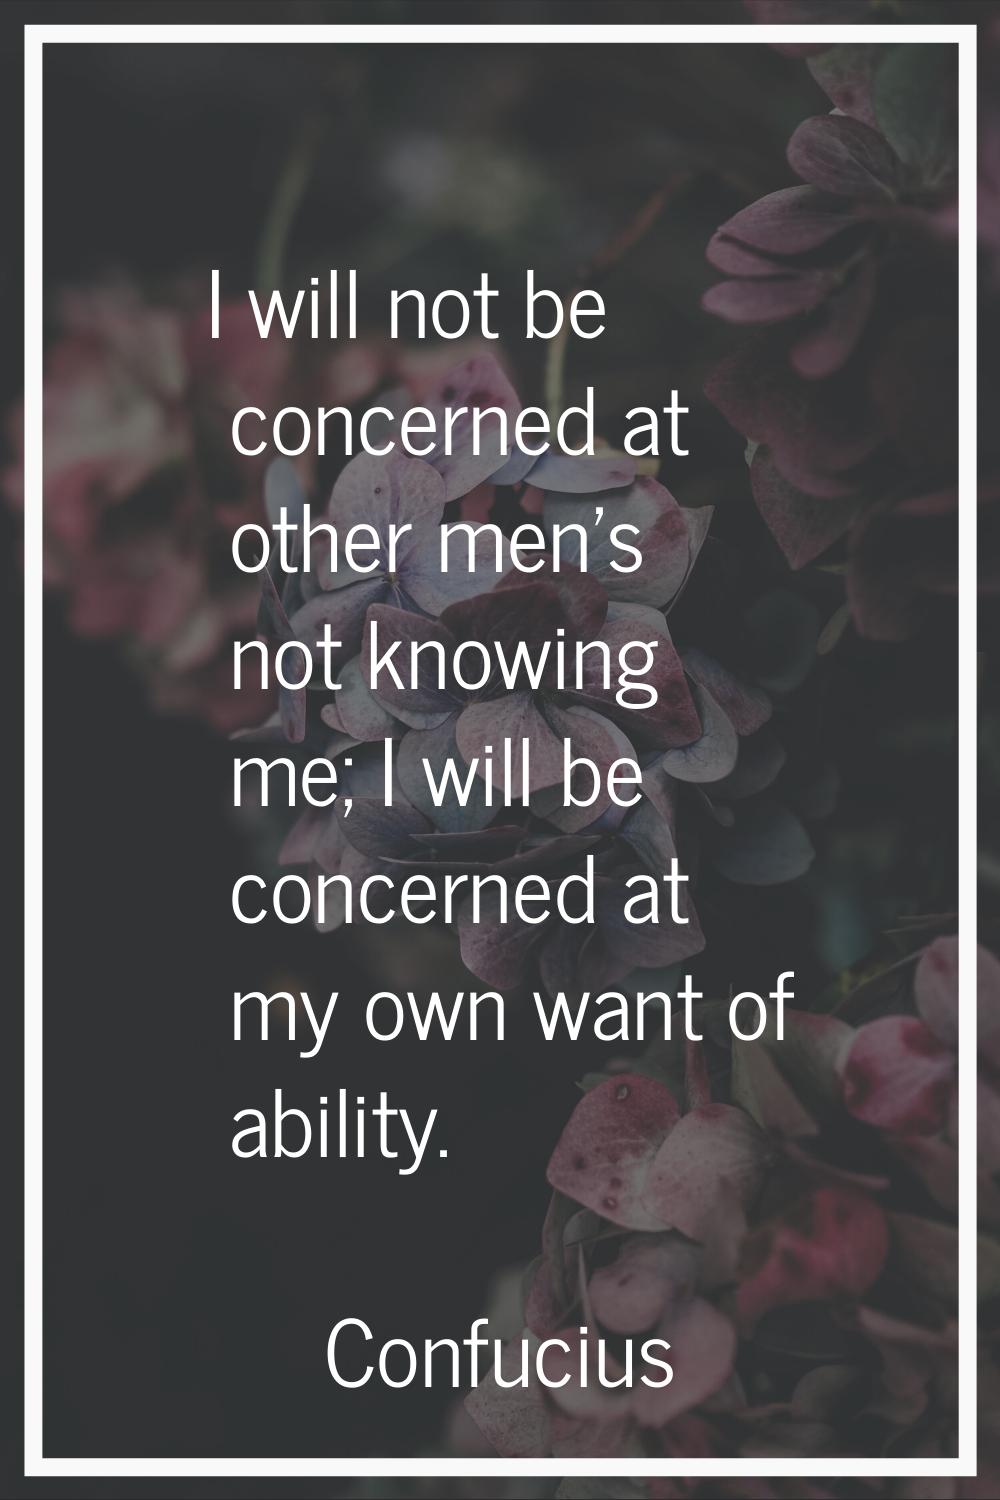 I will not be concerned at other men's not knowing me; I will be concerned at my own want of abilit